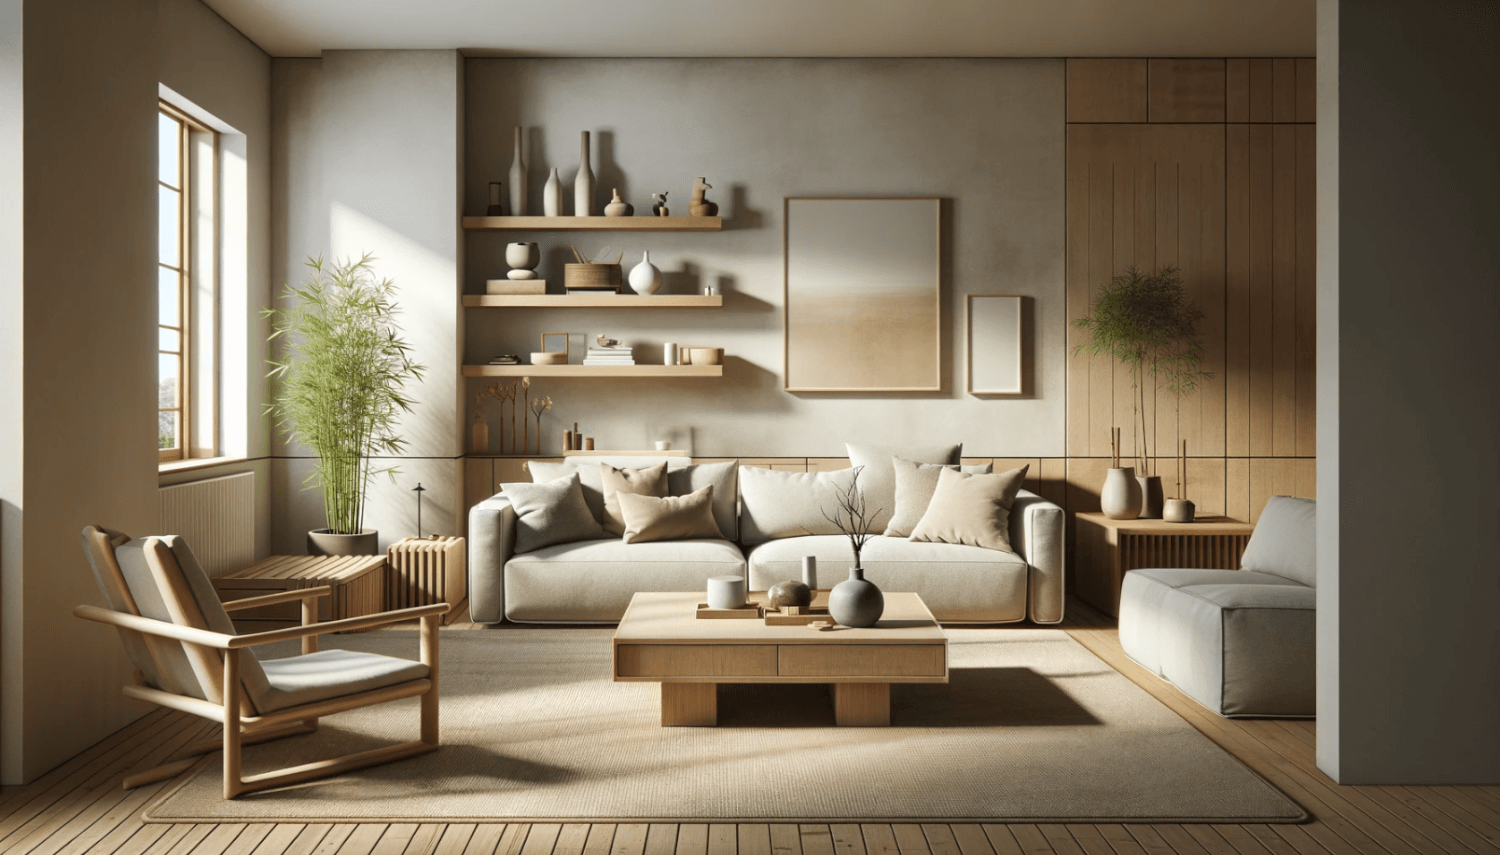 Japandi Home Decor: The Fusion of Functionality and Natural Beauty ...